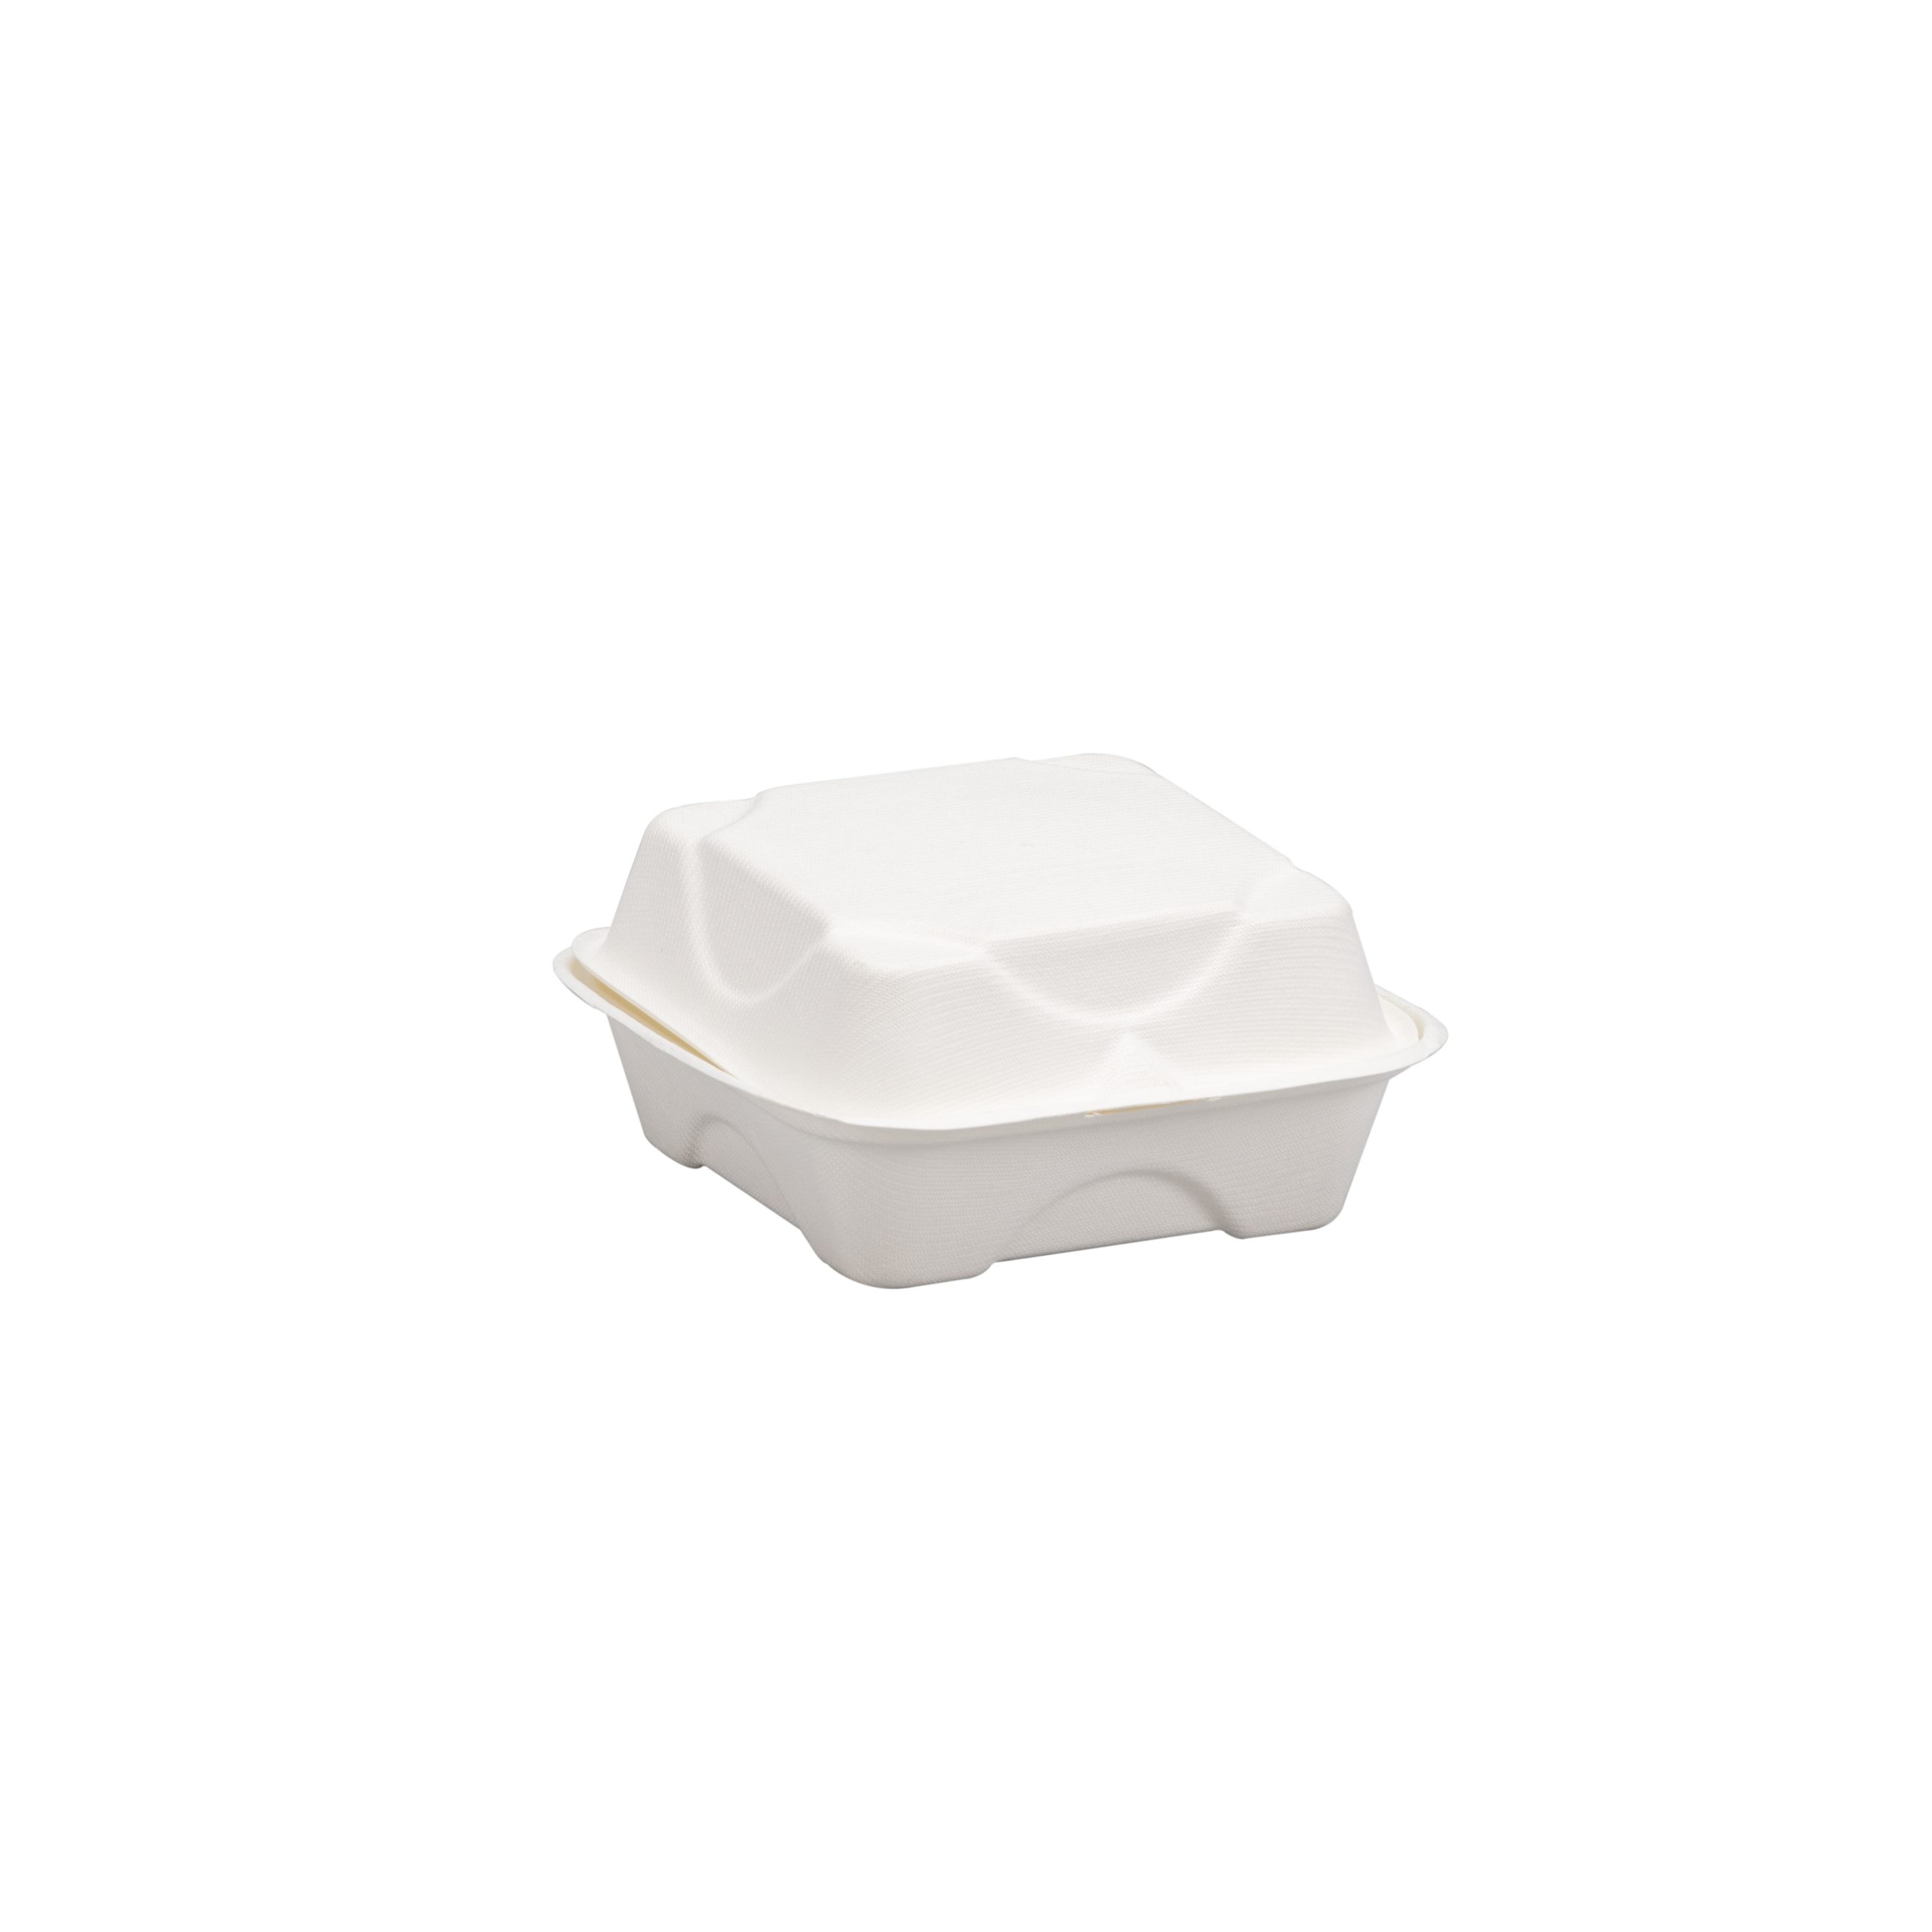 Biodegradable Clamshell – 150 x 150 x 75mm